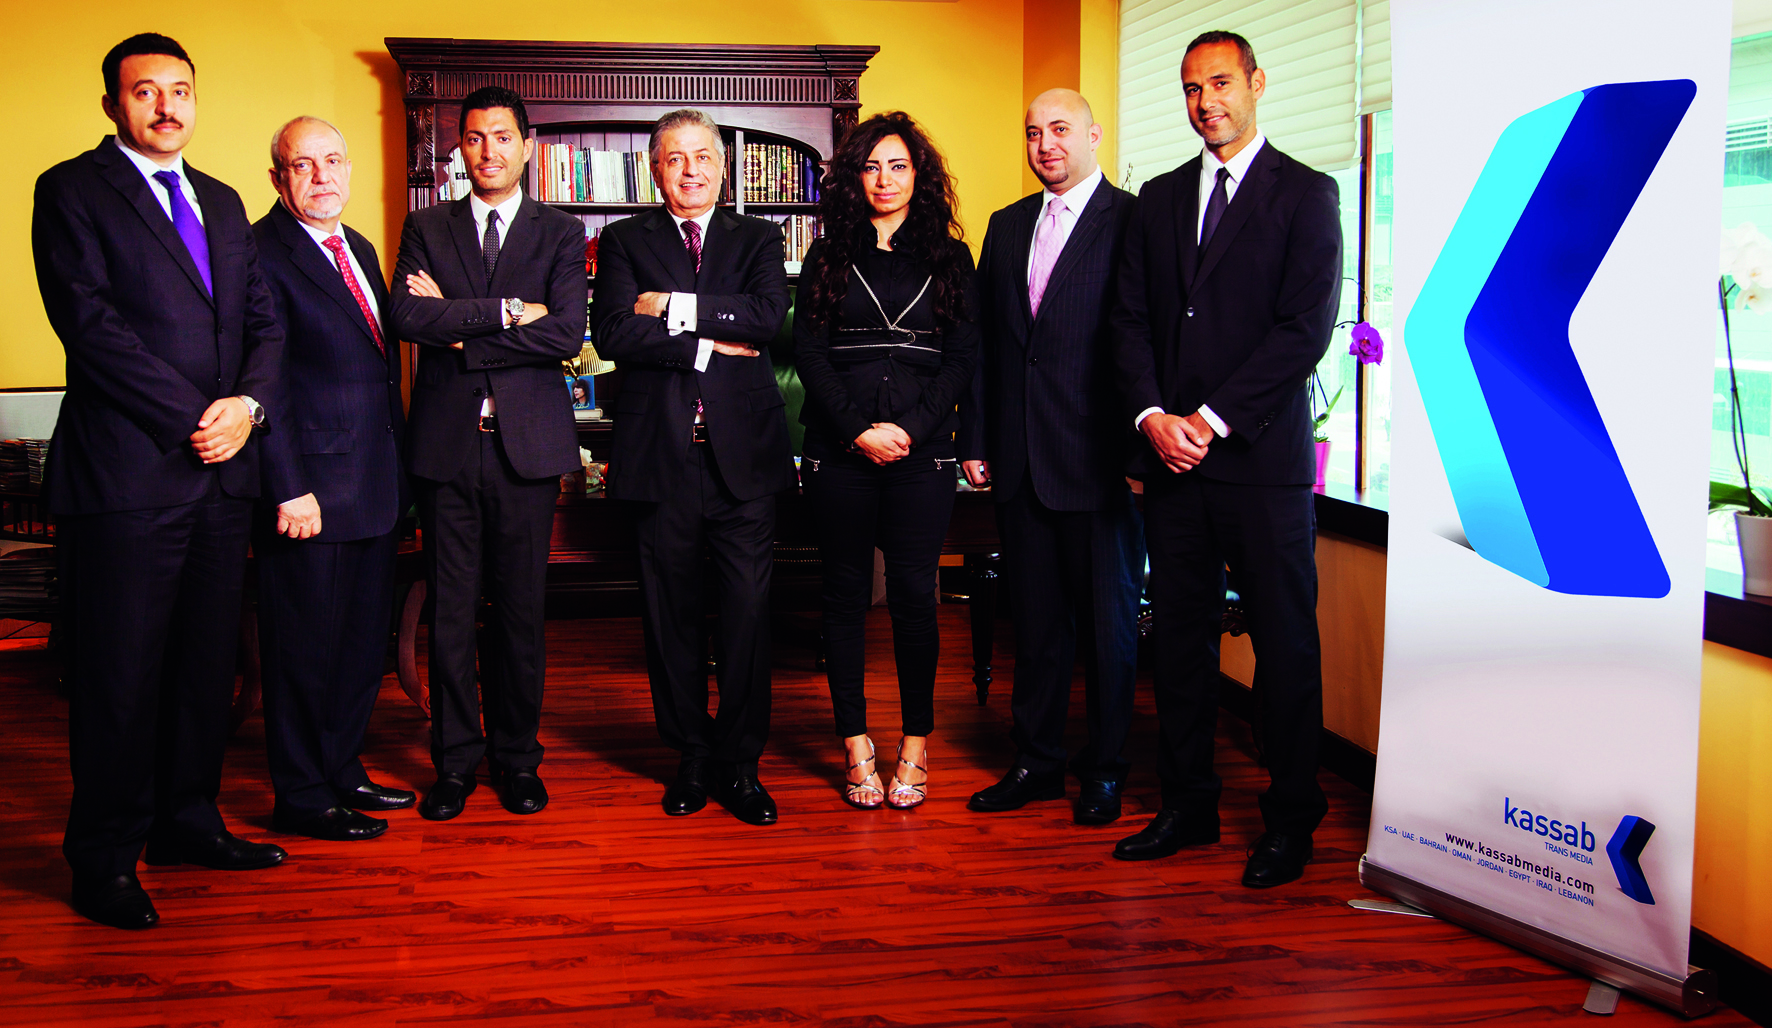 Kassab Group announces a slew of new projects and appointments